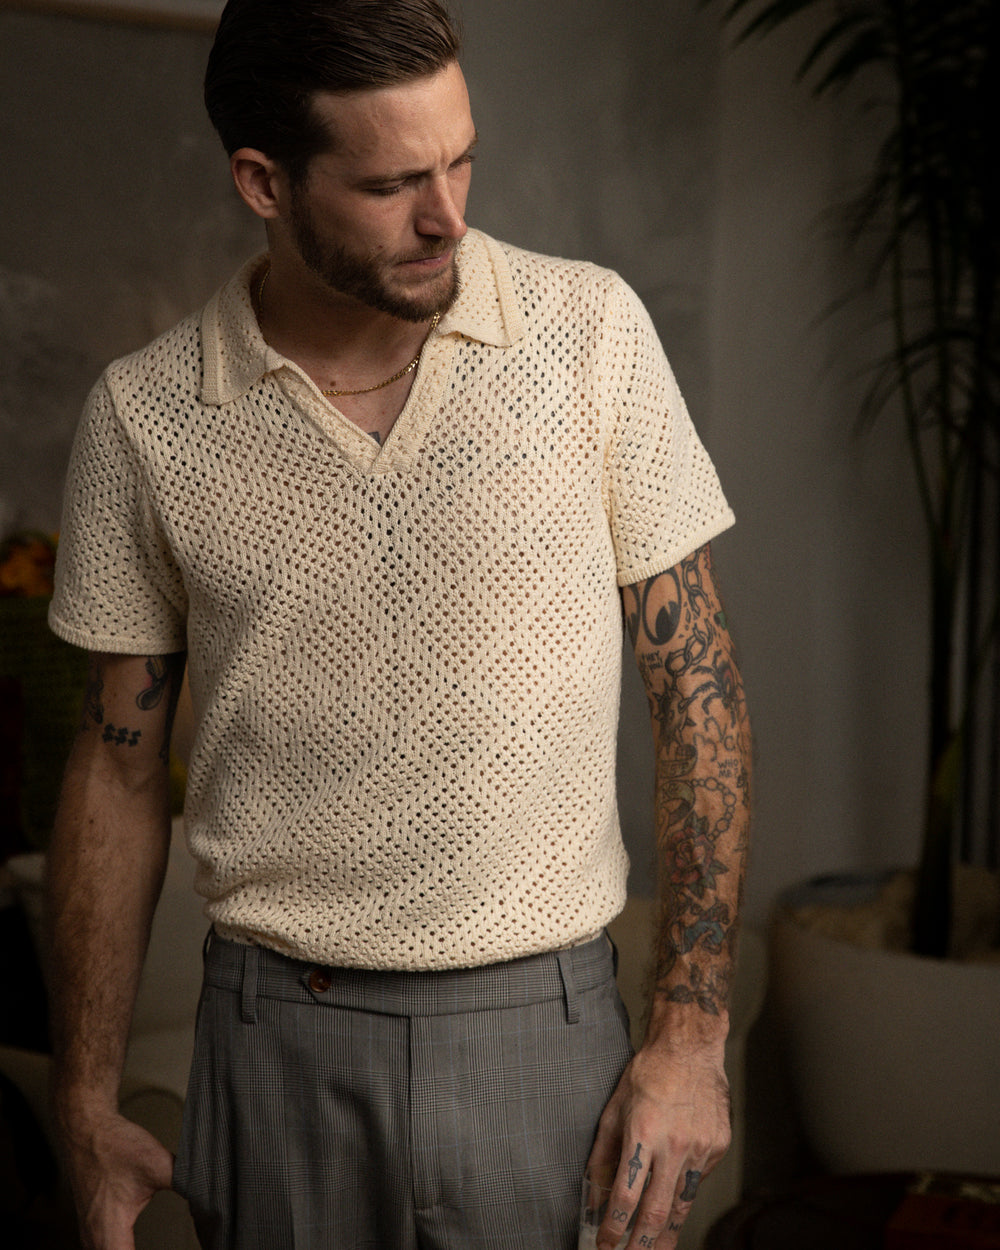 A man with tattoos standing in a living room, wearing The Antibes Crochet Shirt by Dandy Del Mar in Vintage Ivory.